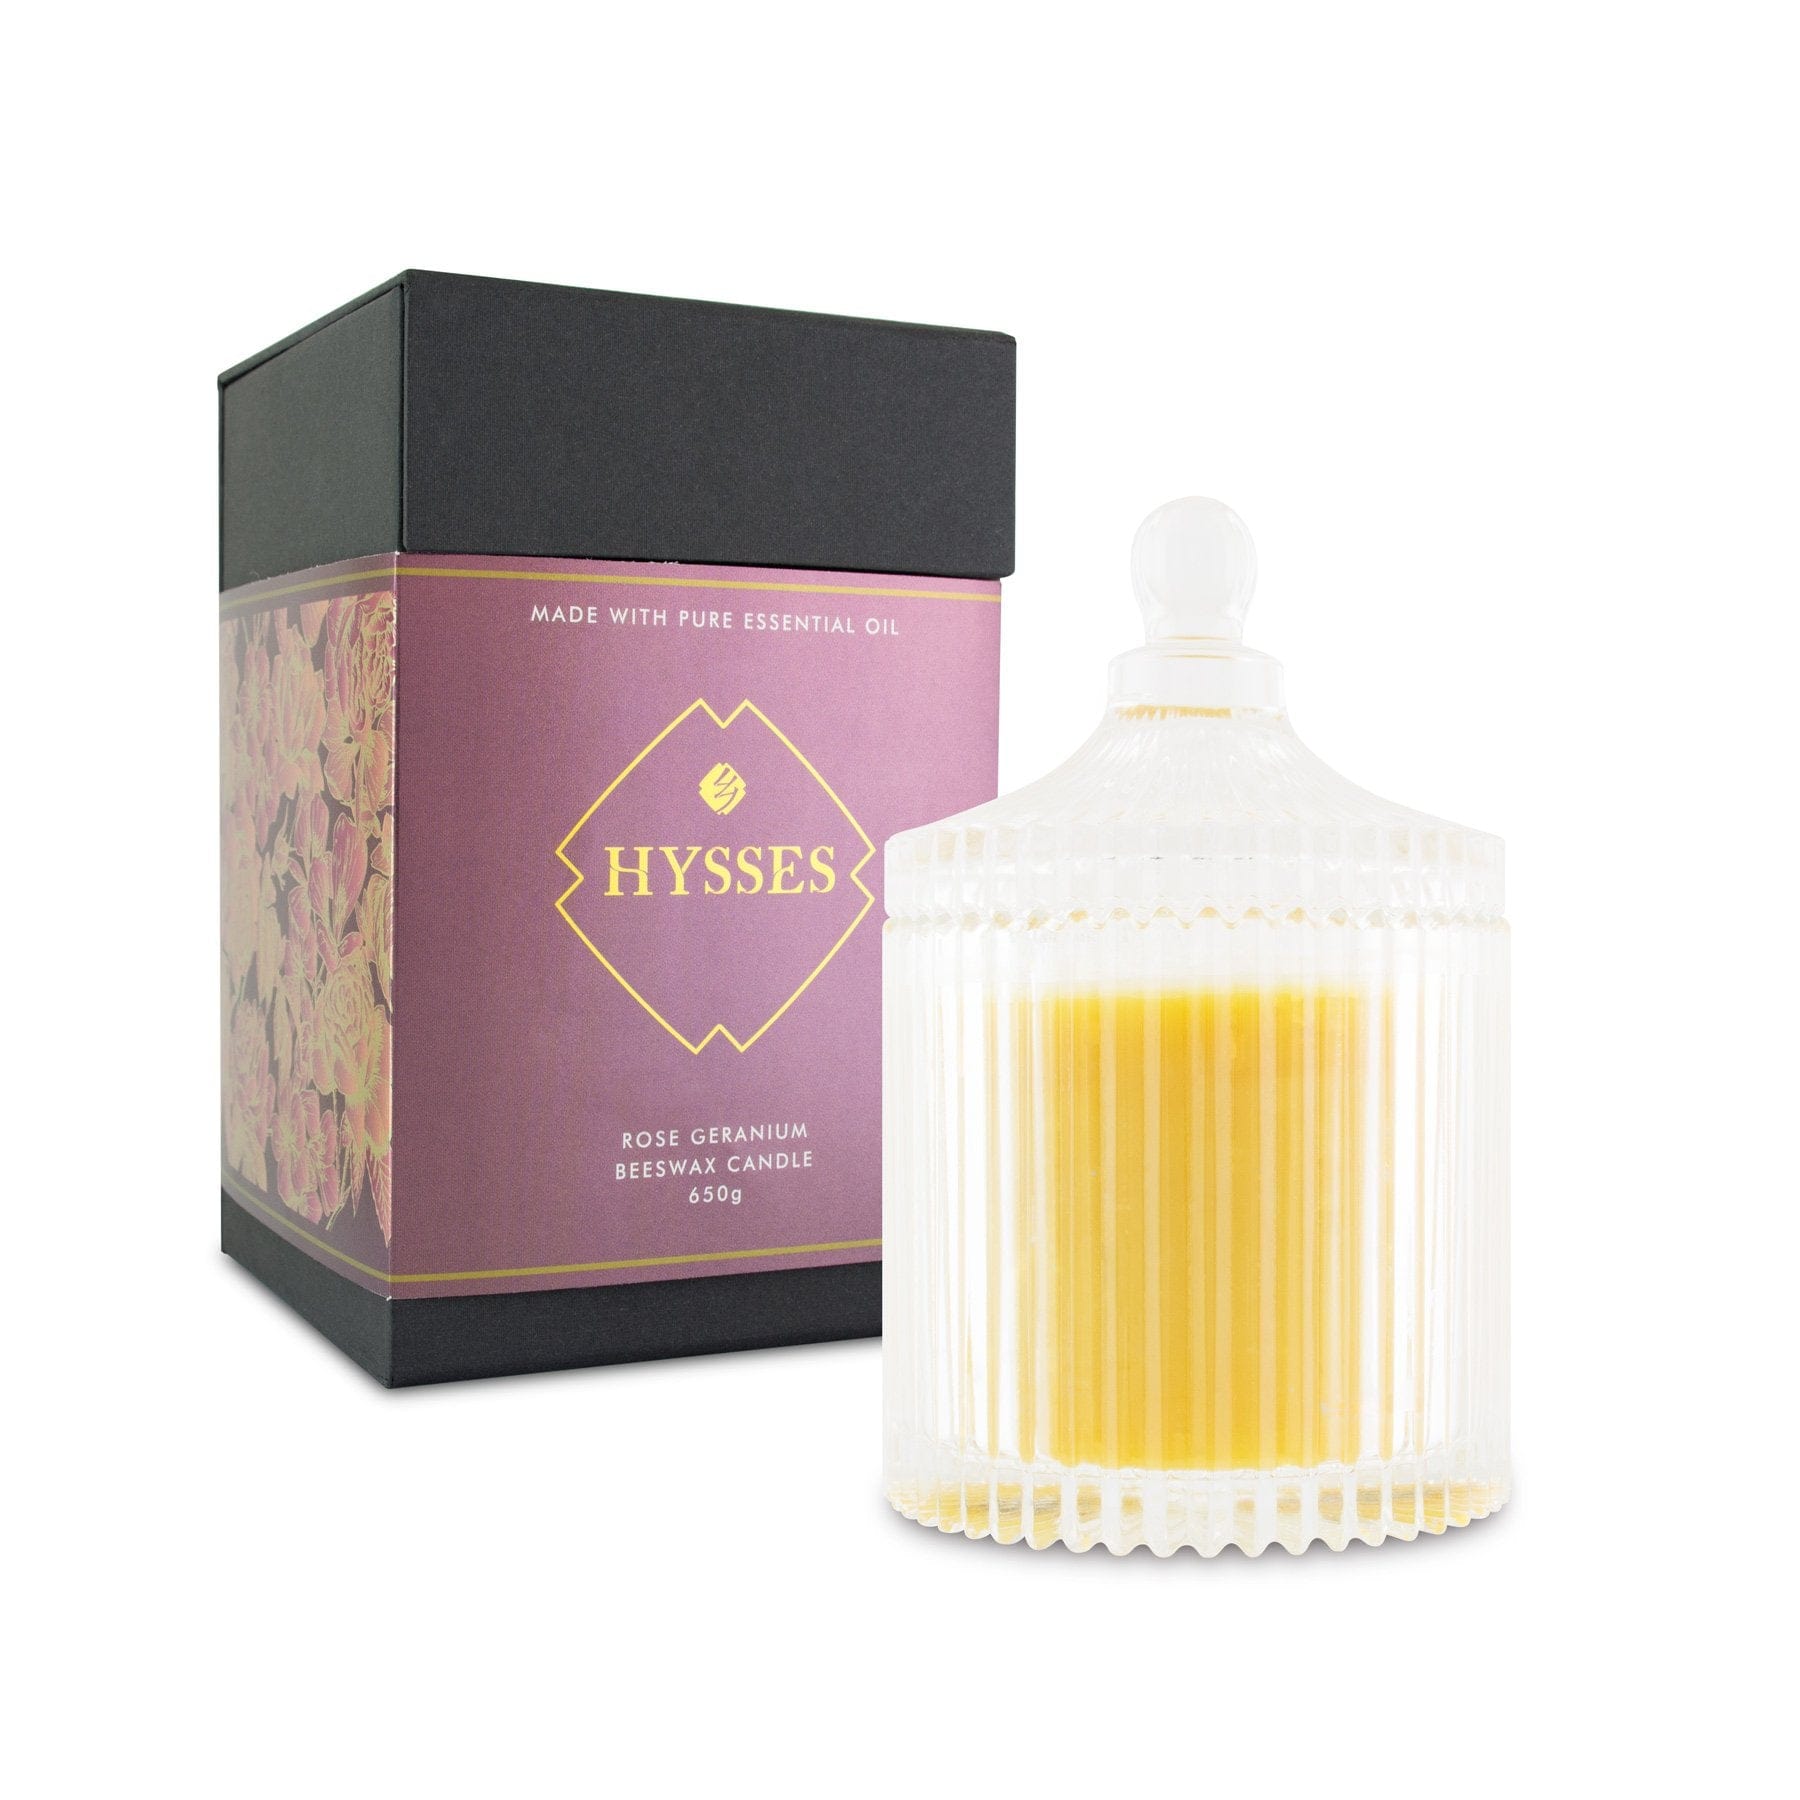 Hysses Home Scents 200g Beeswax Candle Rose Geranium, 200g